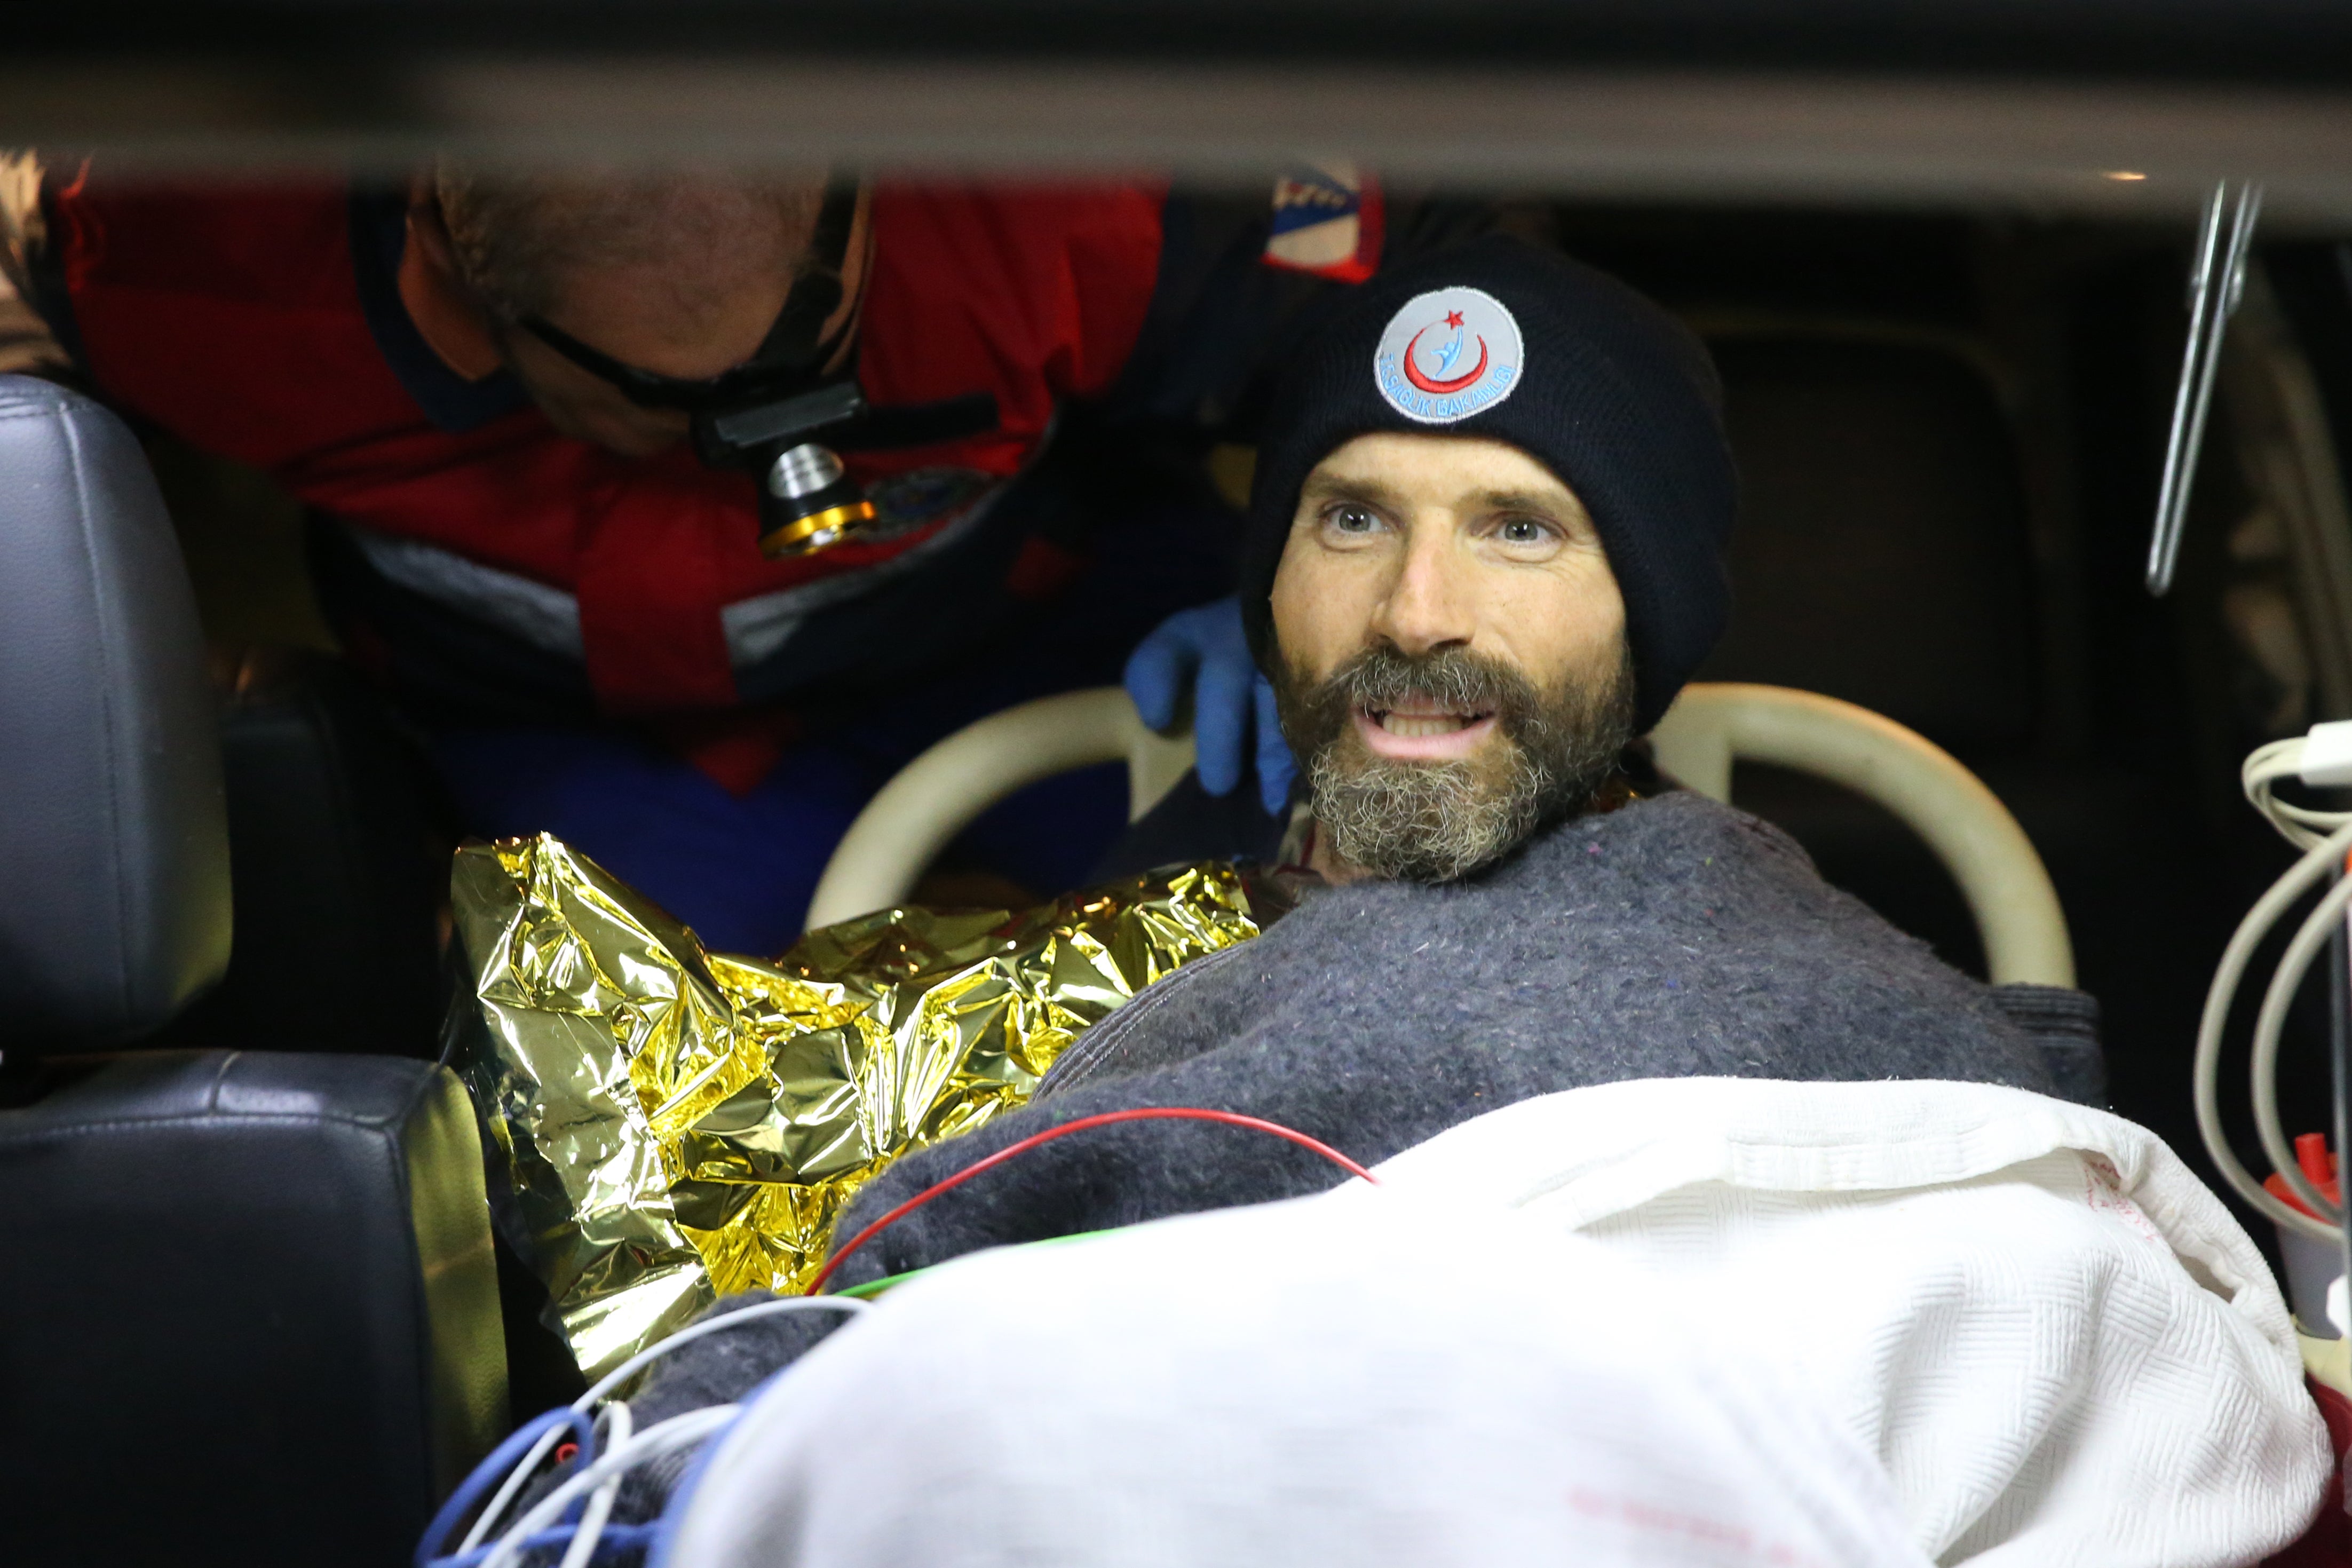 American explorer Mark Dickey after being rescued from being trapped underground in a cave in Turkey’s Mersin